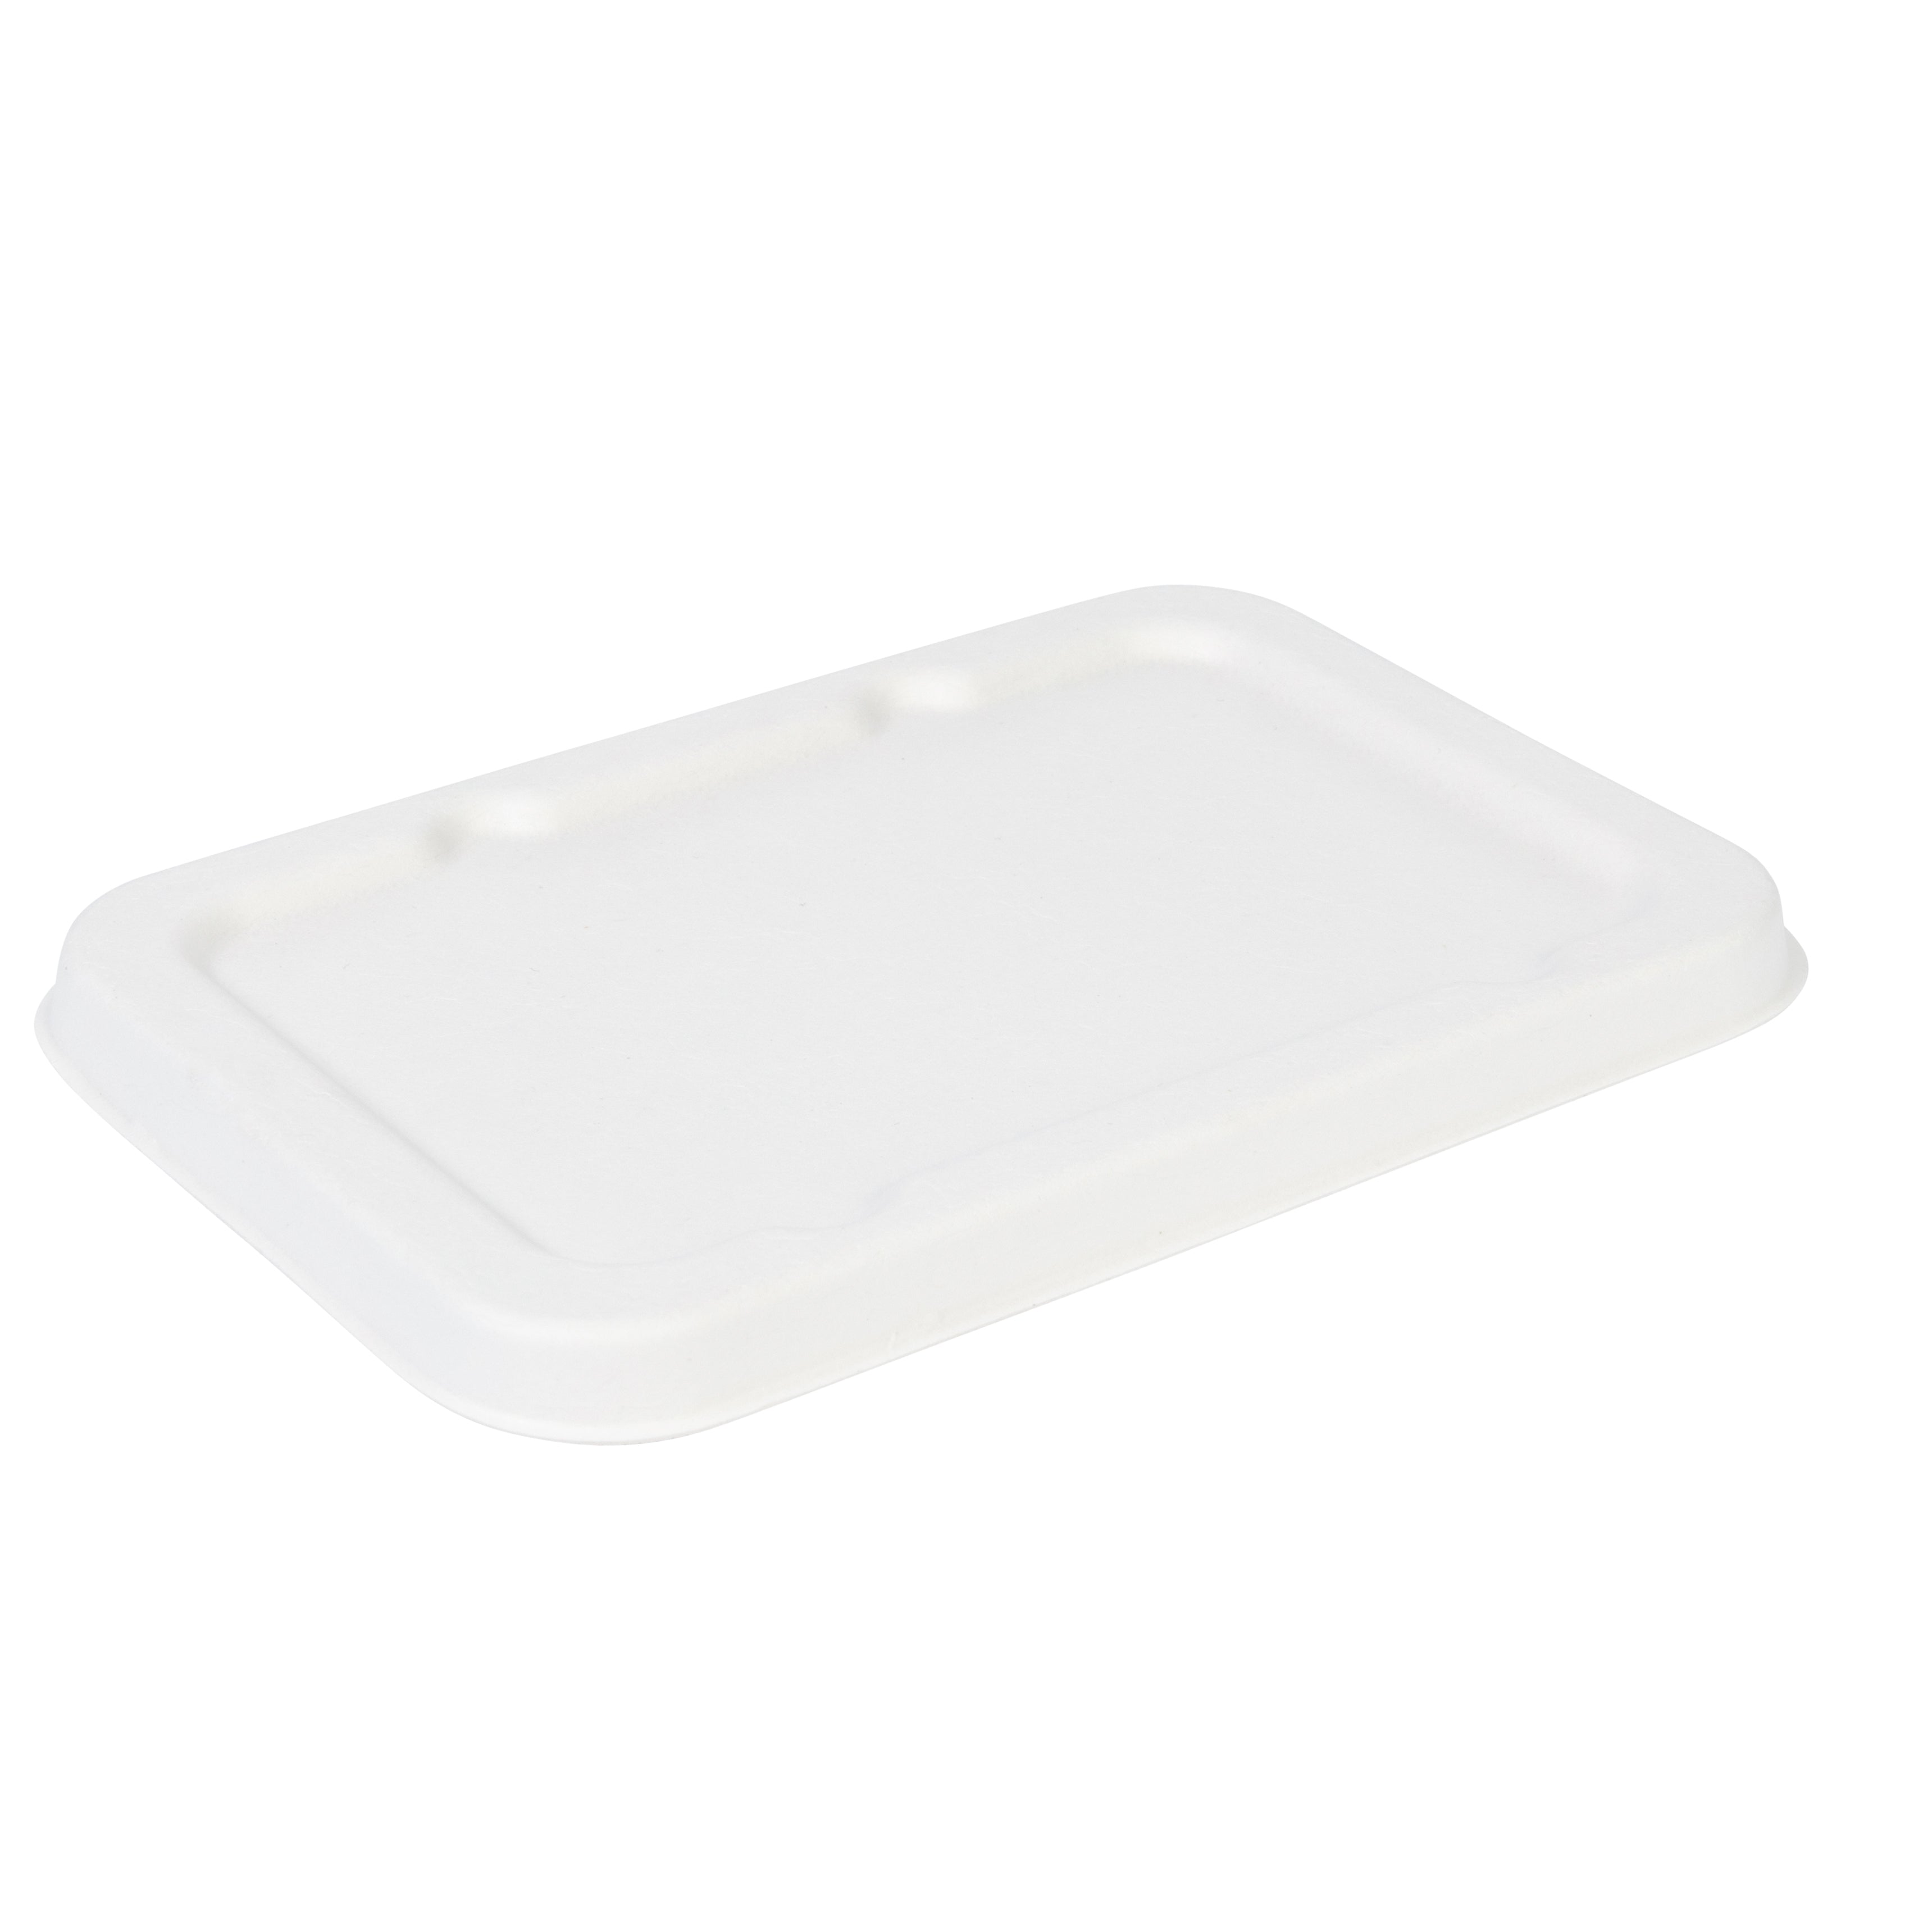 Environmentally friendly Bagasse Lid 500 or 650ml dishes.